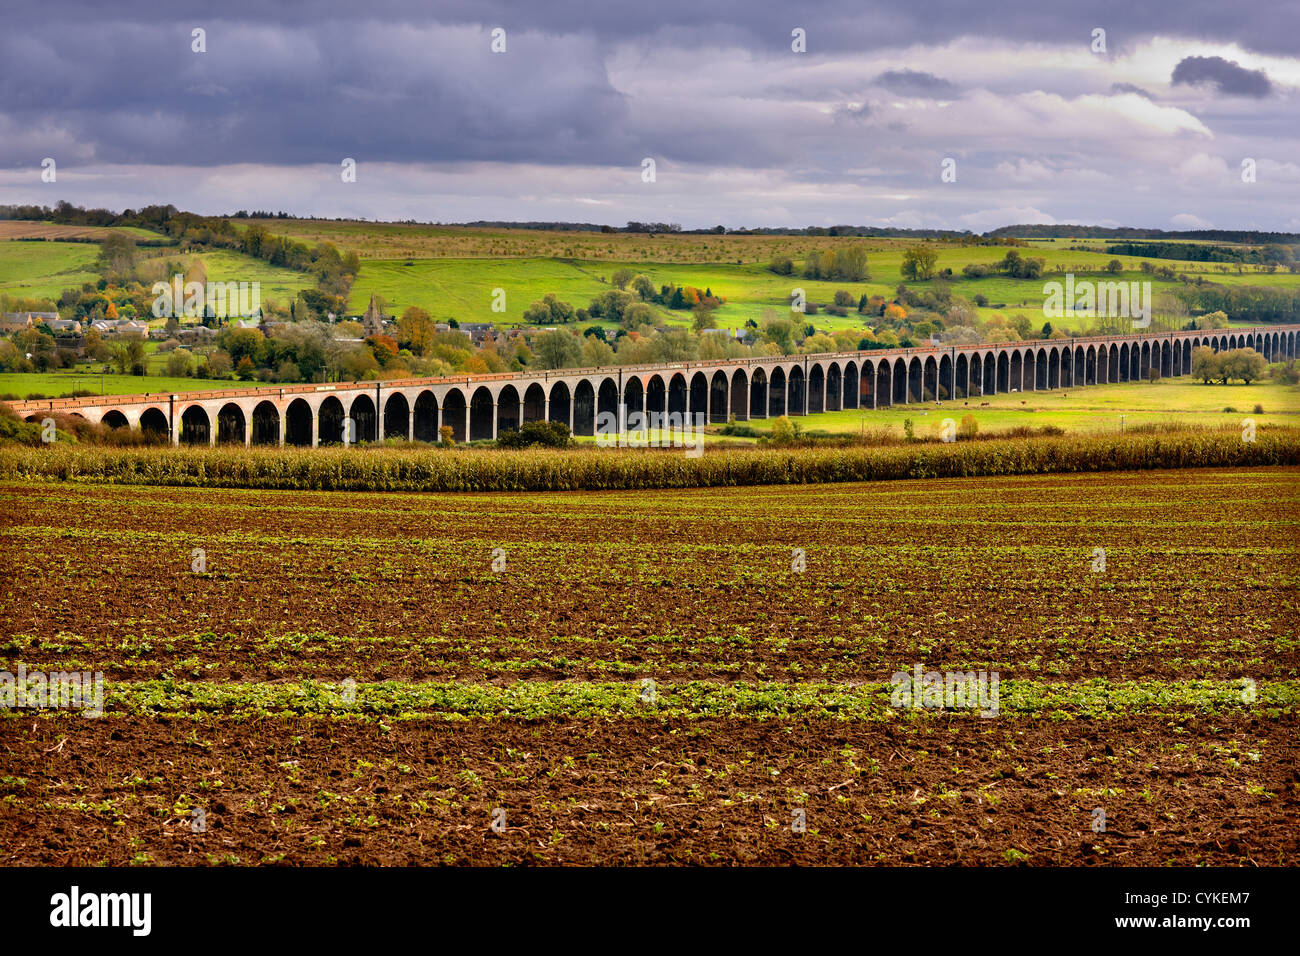 Welland Viaduct, also known as Harringworth Viaduct or Seaton Viaduct. Spans the Welland Valley from Northamptonshire to Rutland Stock Photo